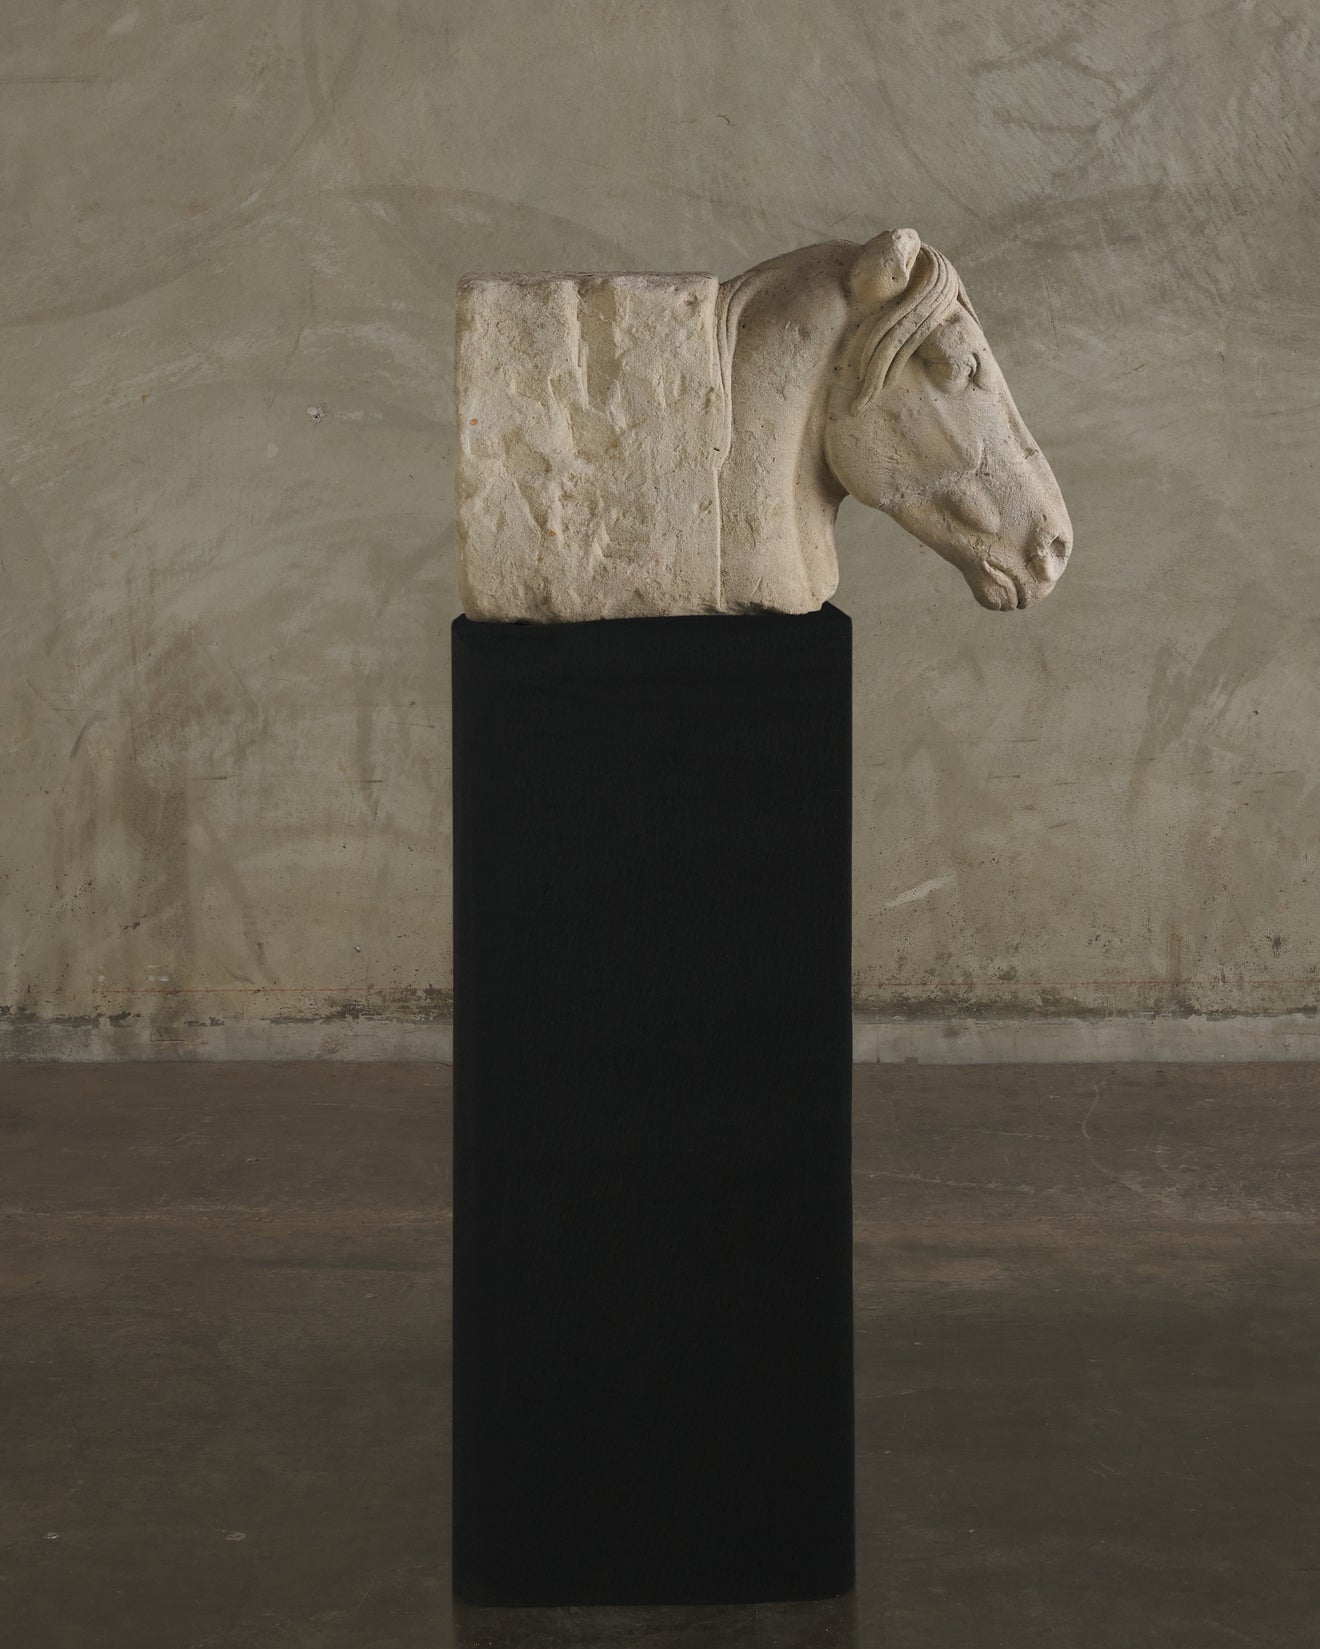 ITALIAN ARCHITECTURAL CARVED STONE HORSE